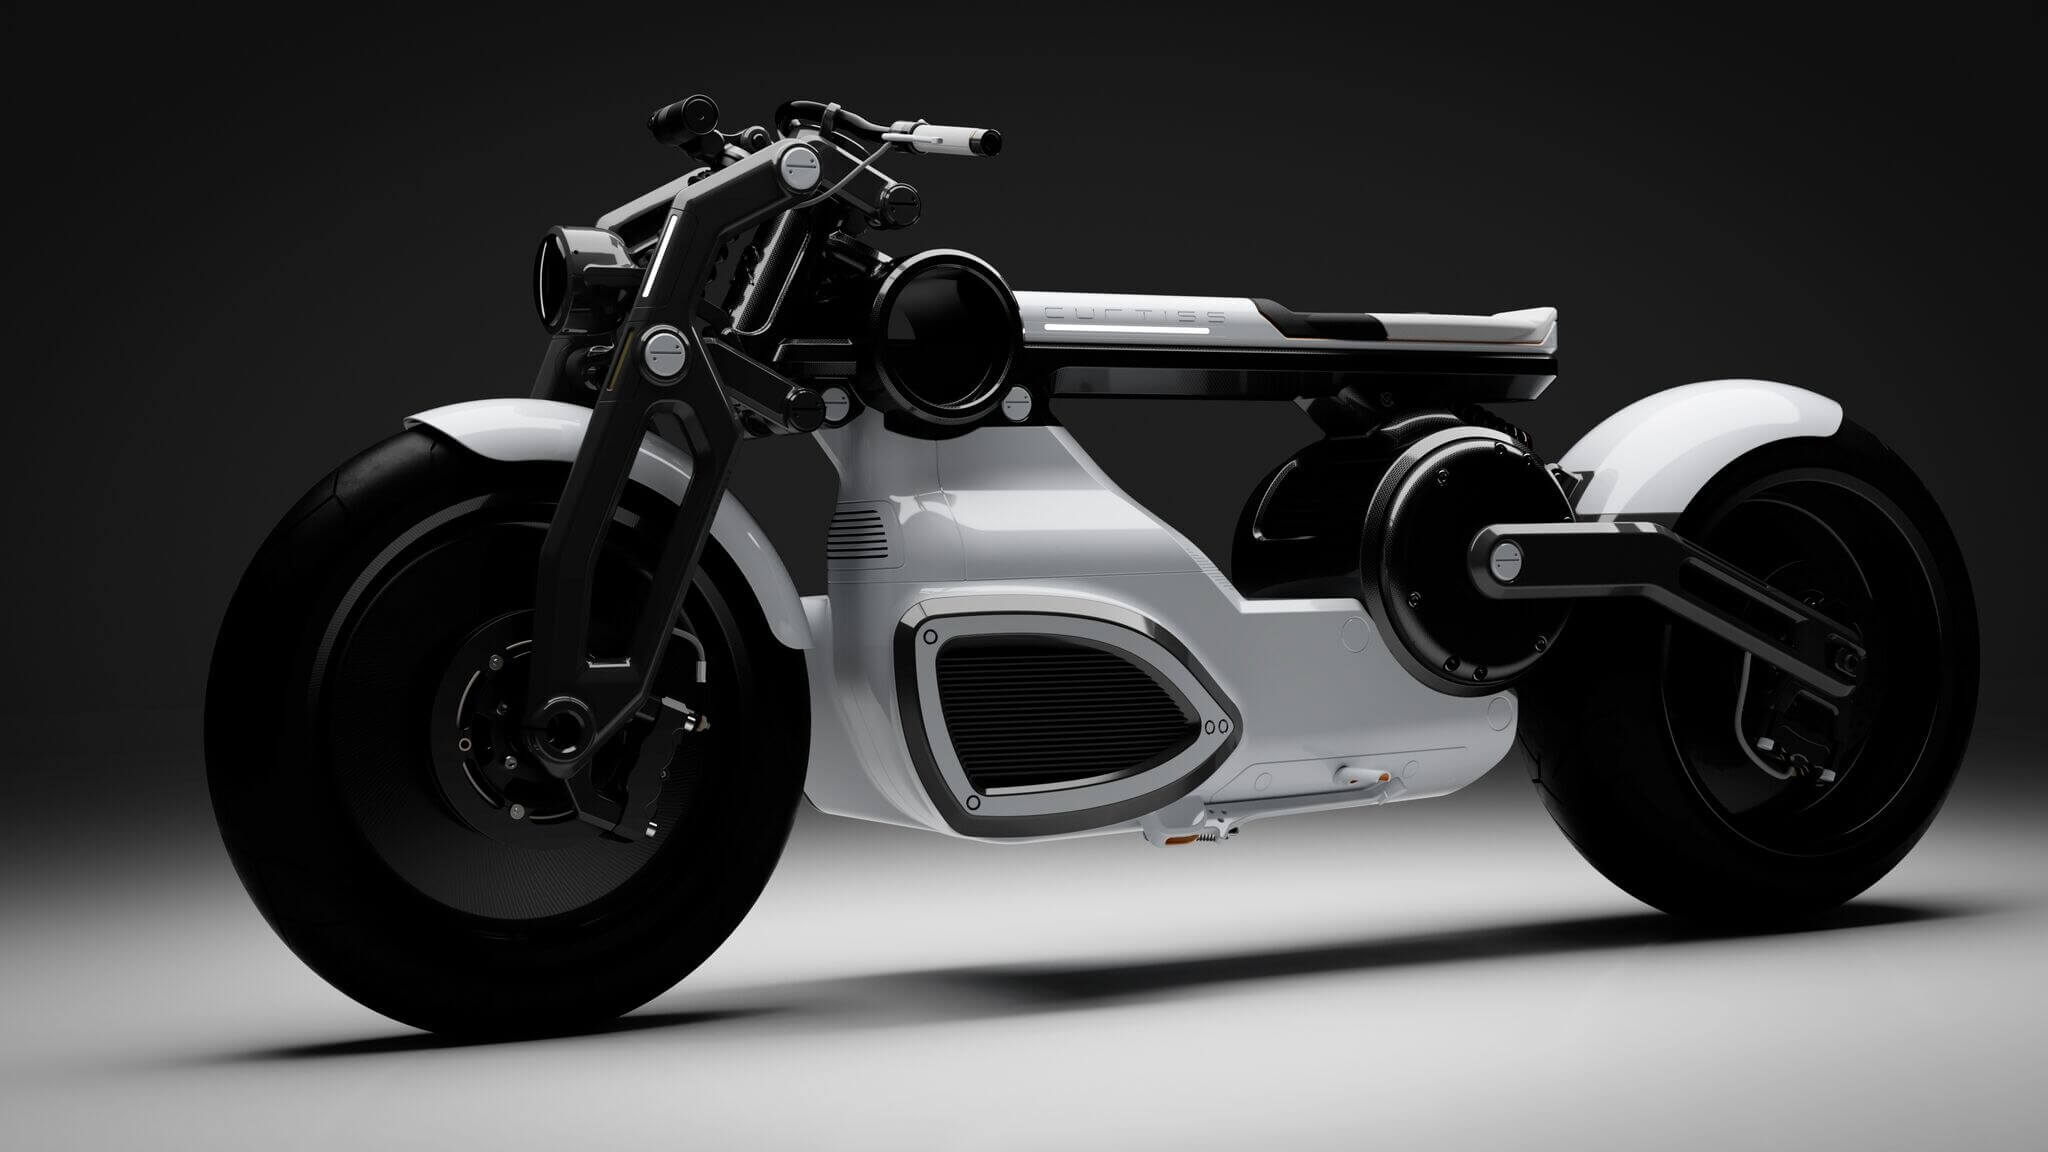 Curtiss unveils its 'Zeus' electric motorcycles, capable of 0-60 in 2.1 seconds